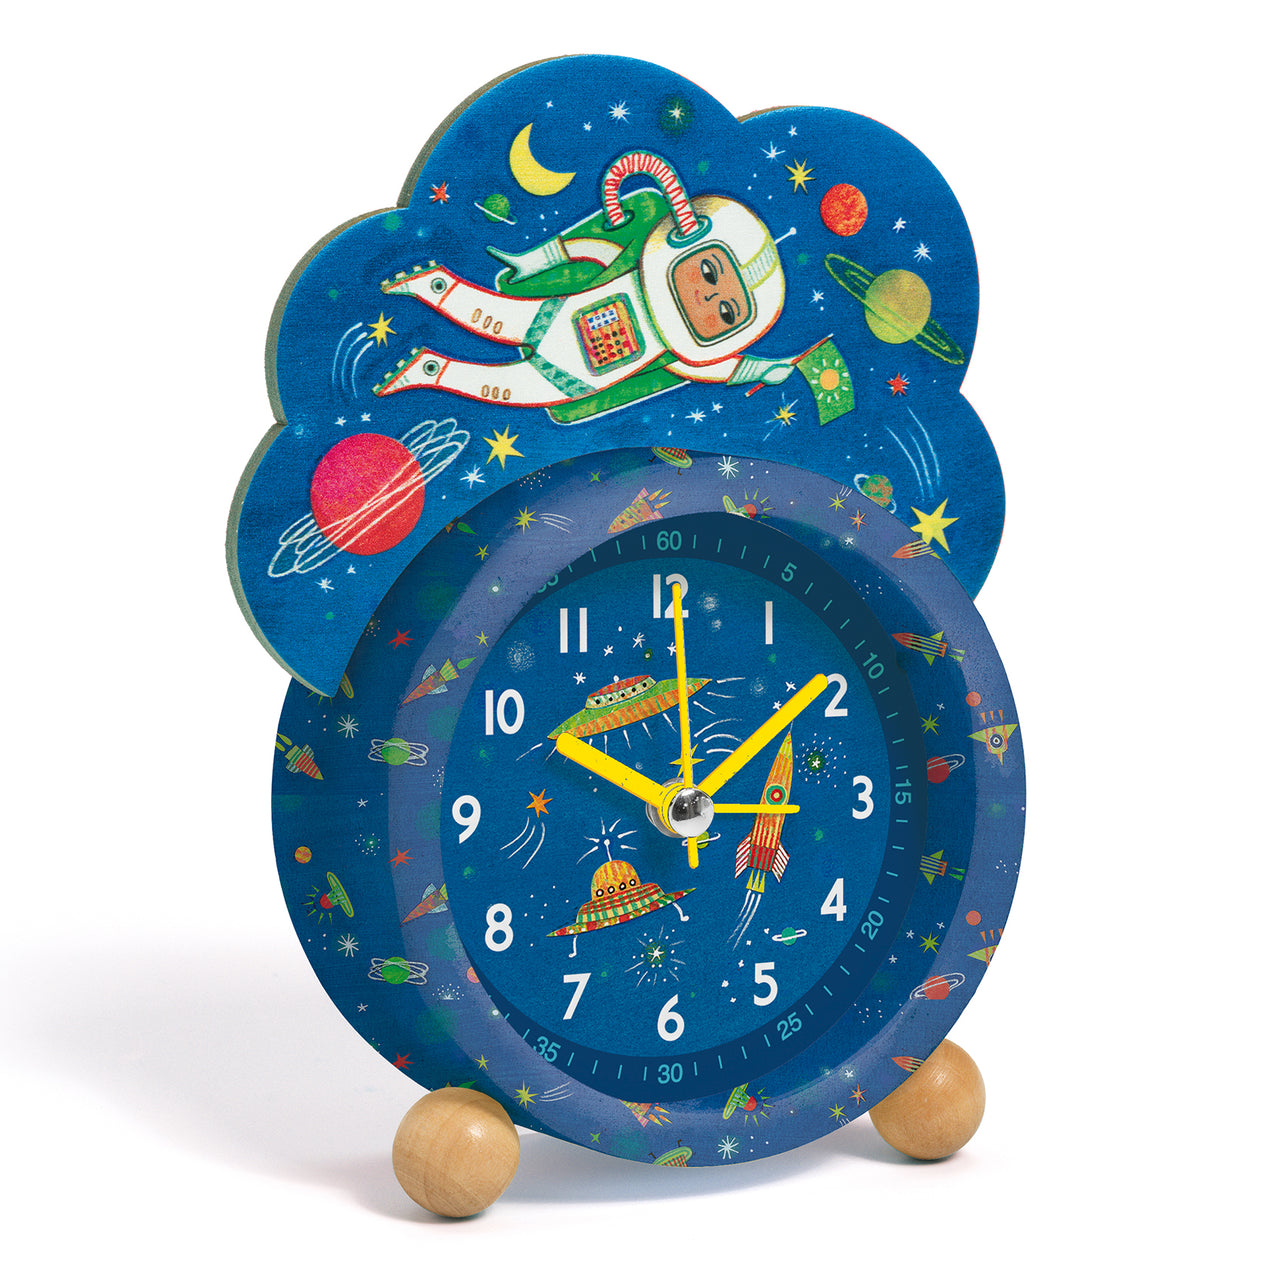 A pretty space-inspired alarm clock to wake up gently and to learn to tell the time. The hands display the hours, minutes and seconds with a silent quartz movement and thanks to the light button, the child can see the time in the dark. 